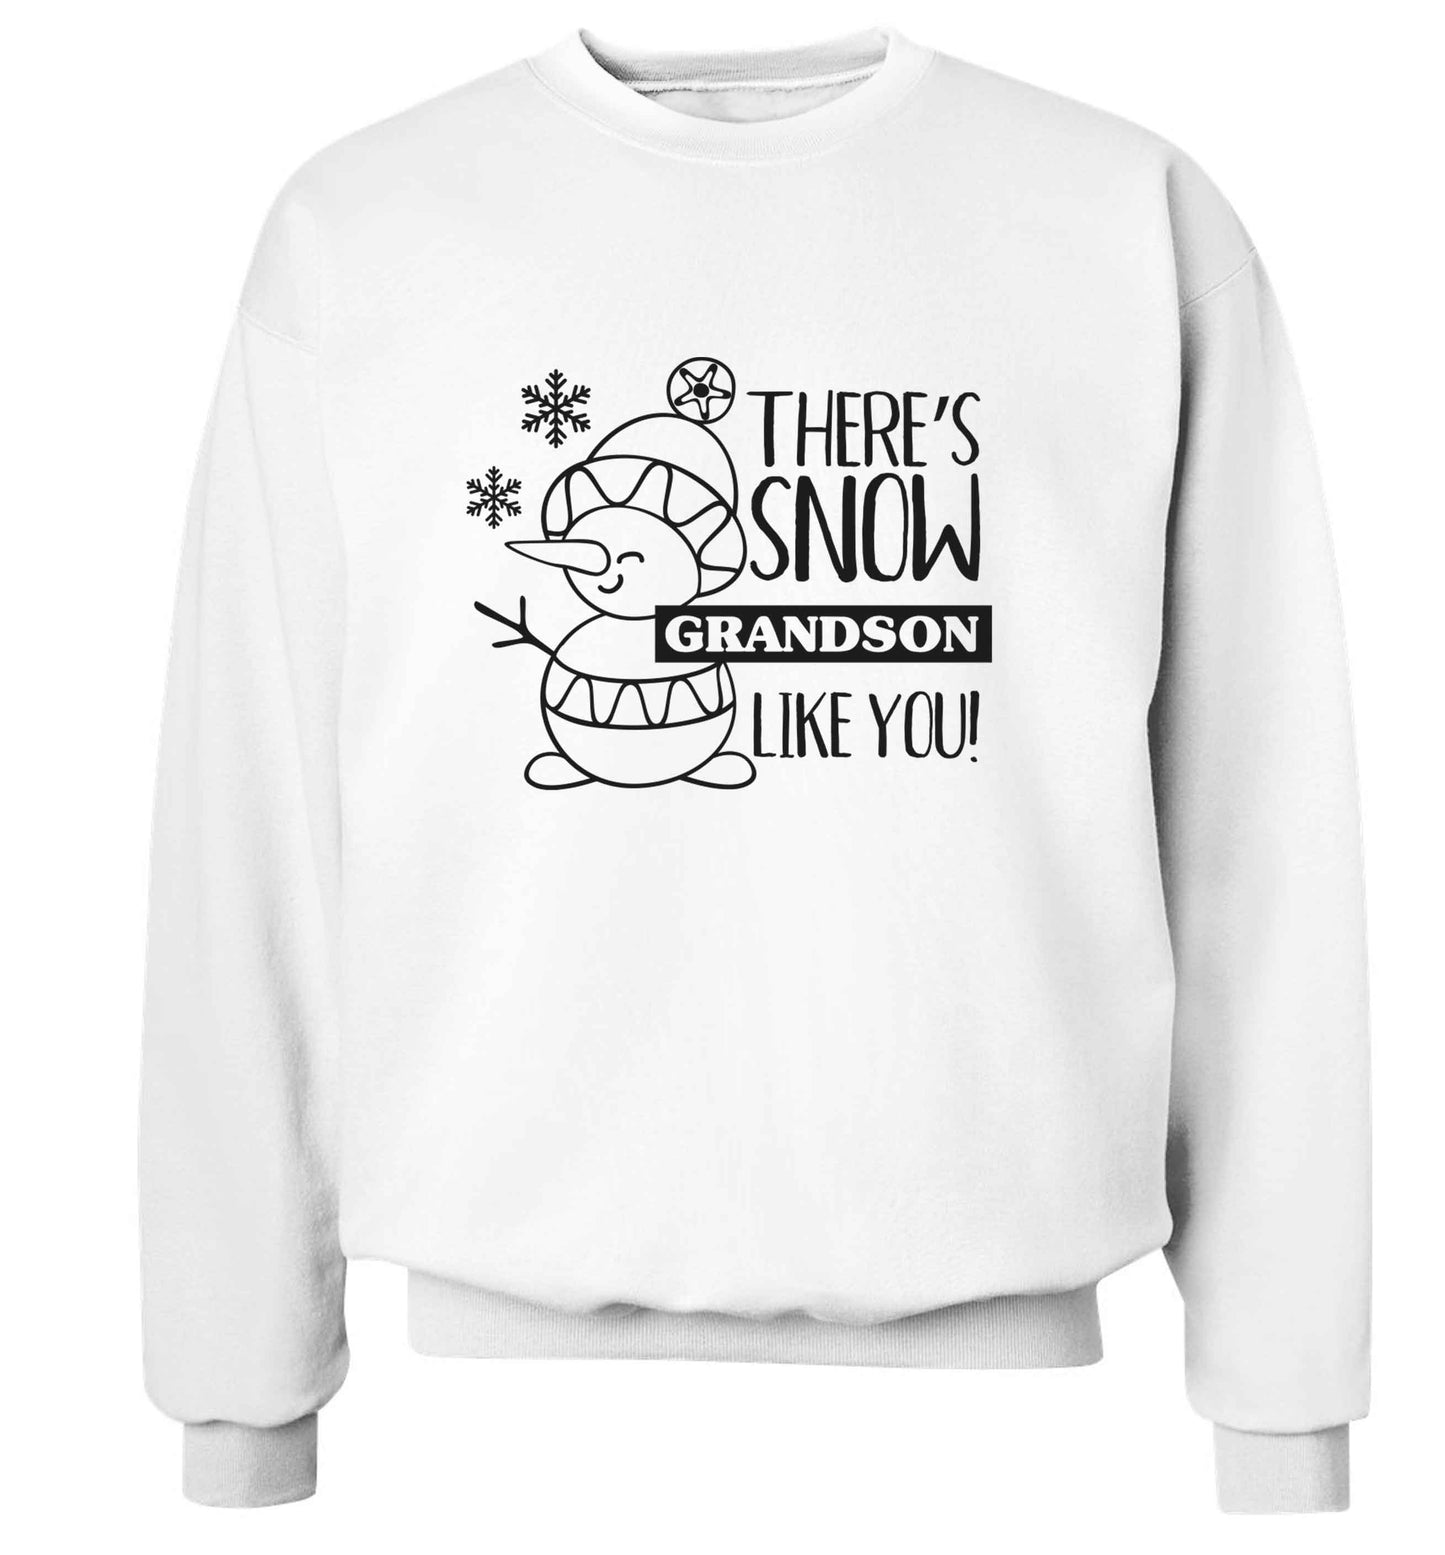 There's snow grandson like you adult's unisex white sweater 2XL